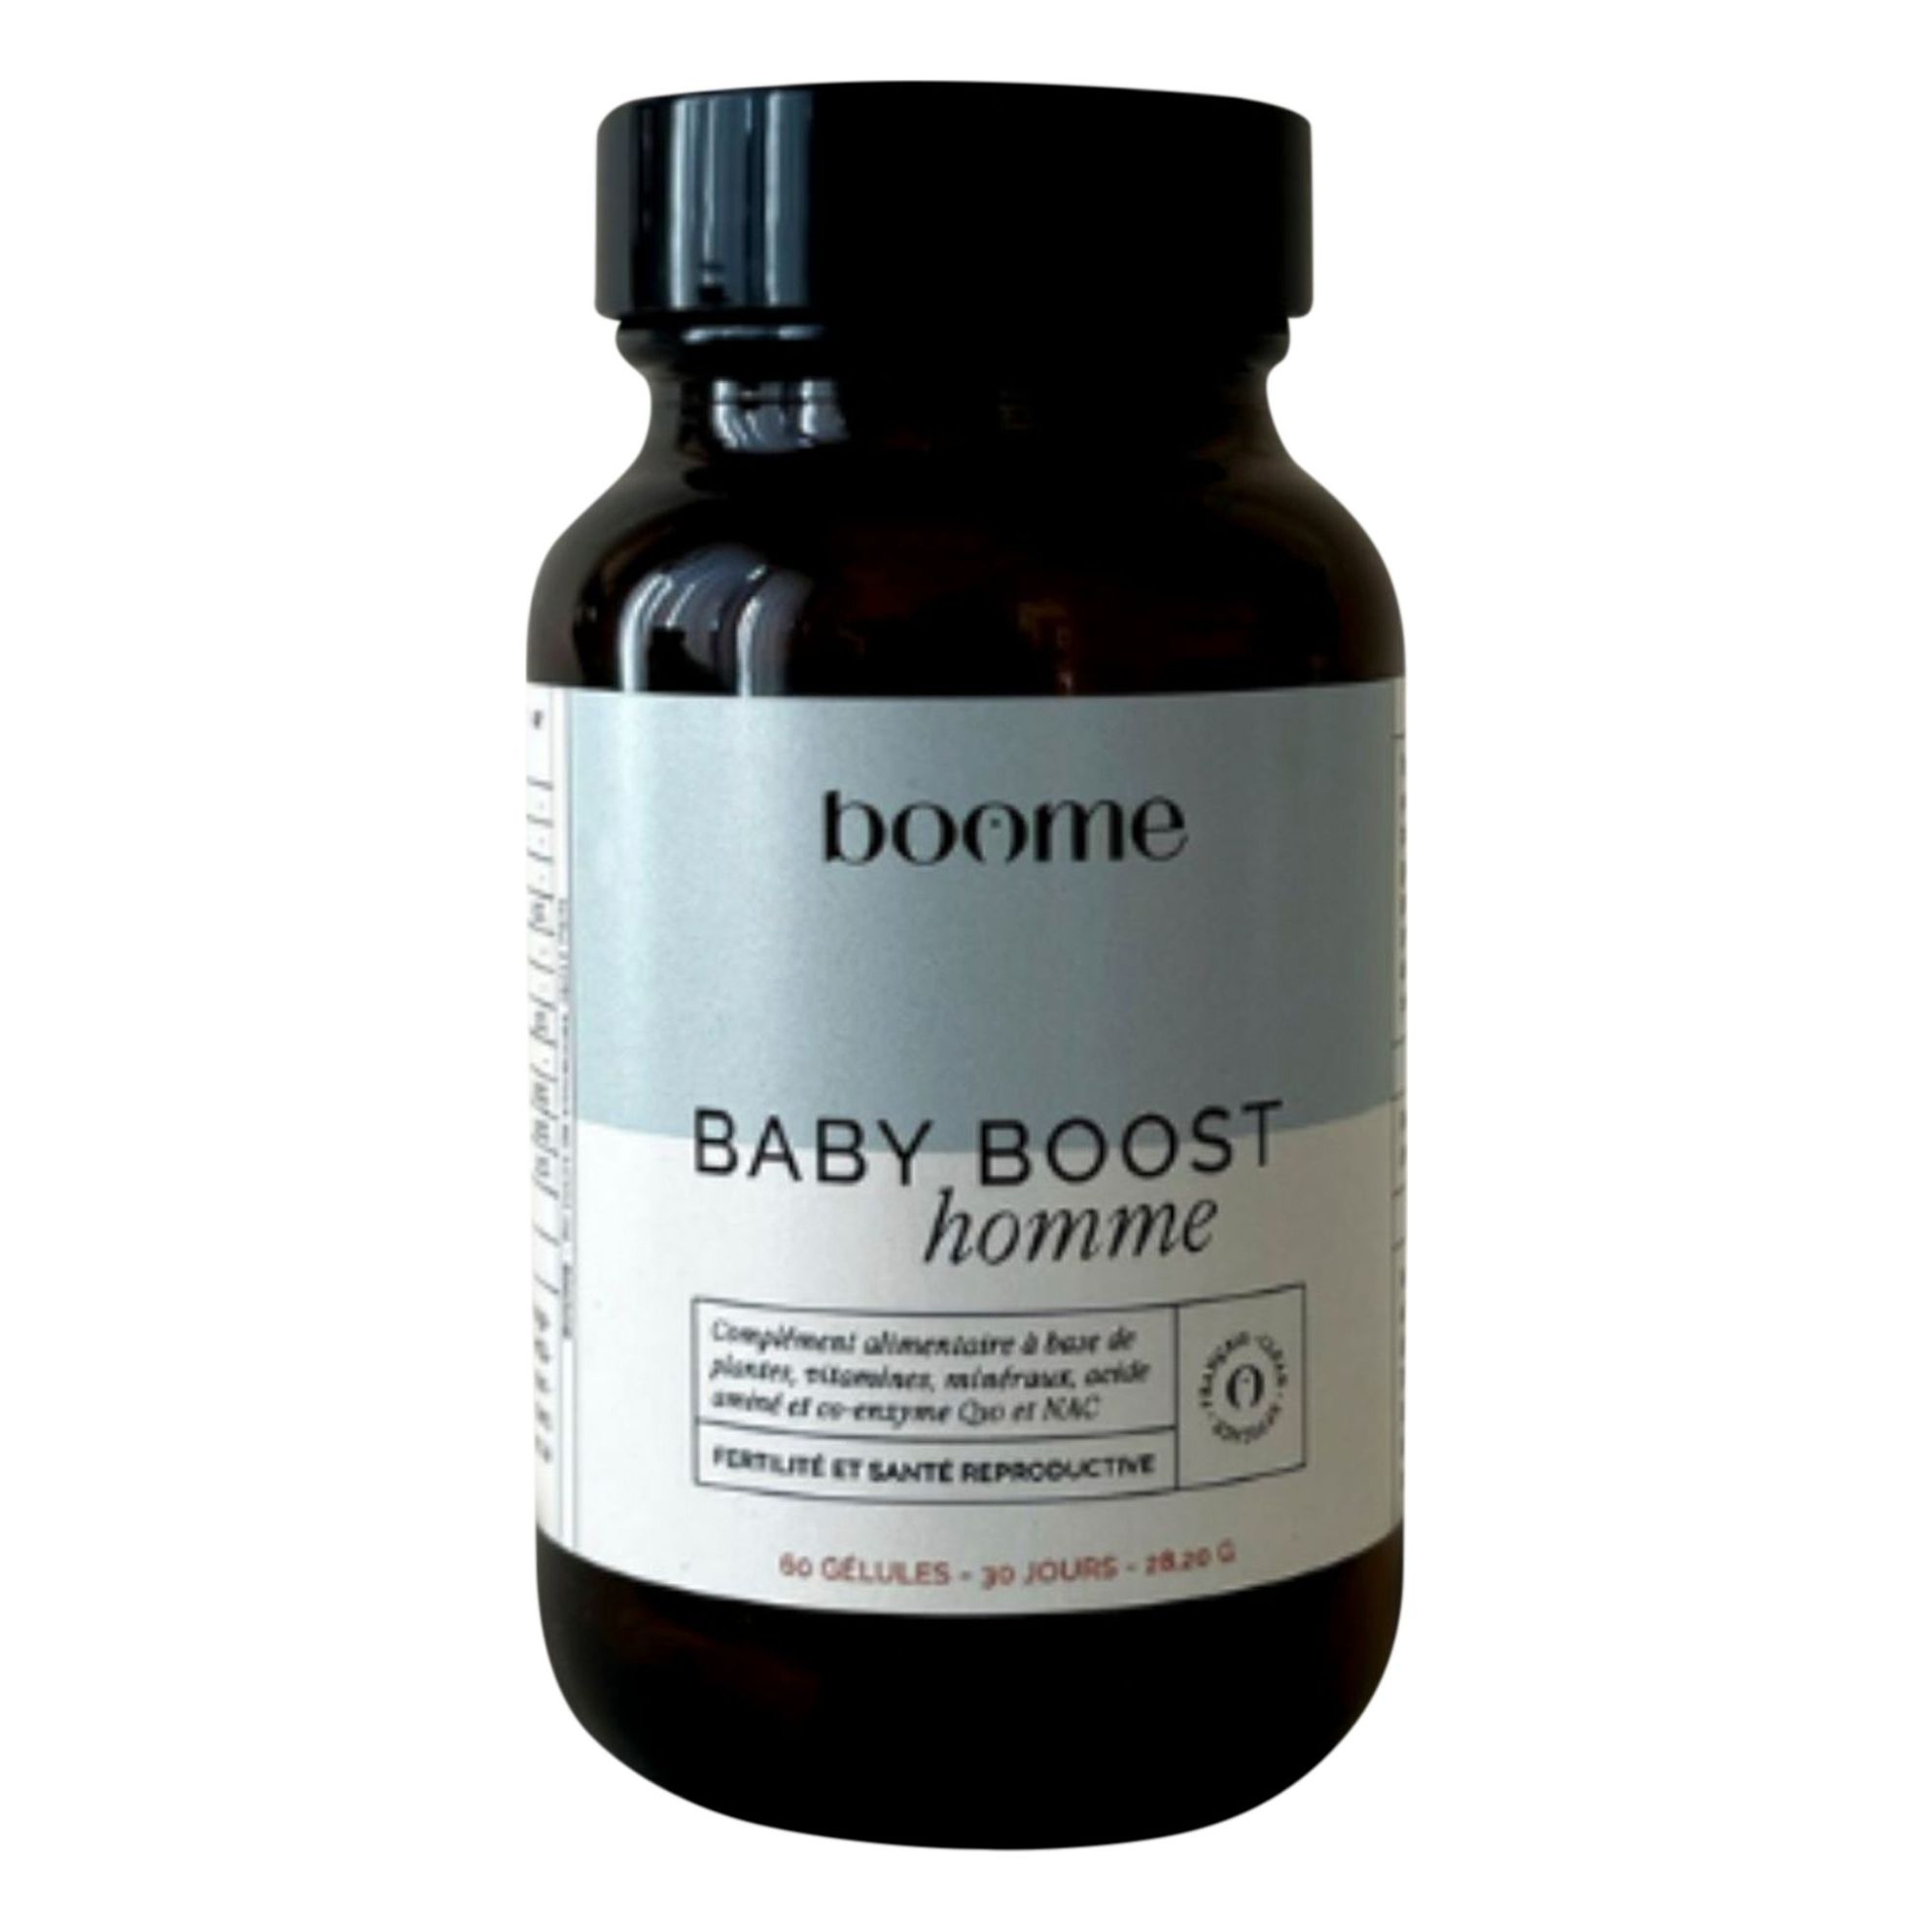 Boome - Baby Boost Homme Complément alimentaire - 1 mois